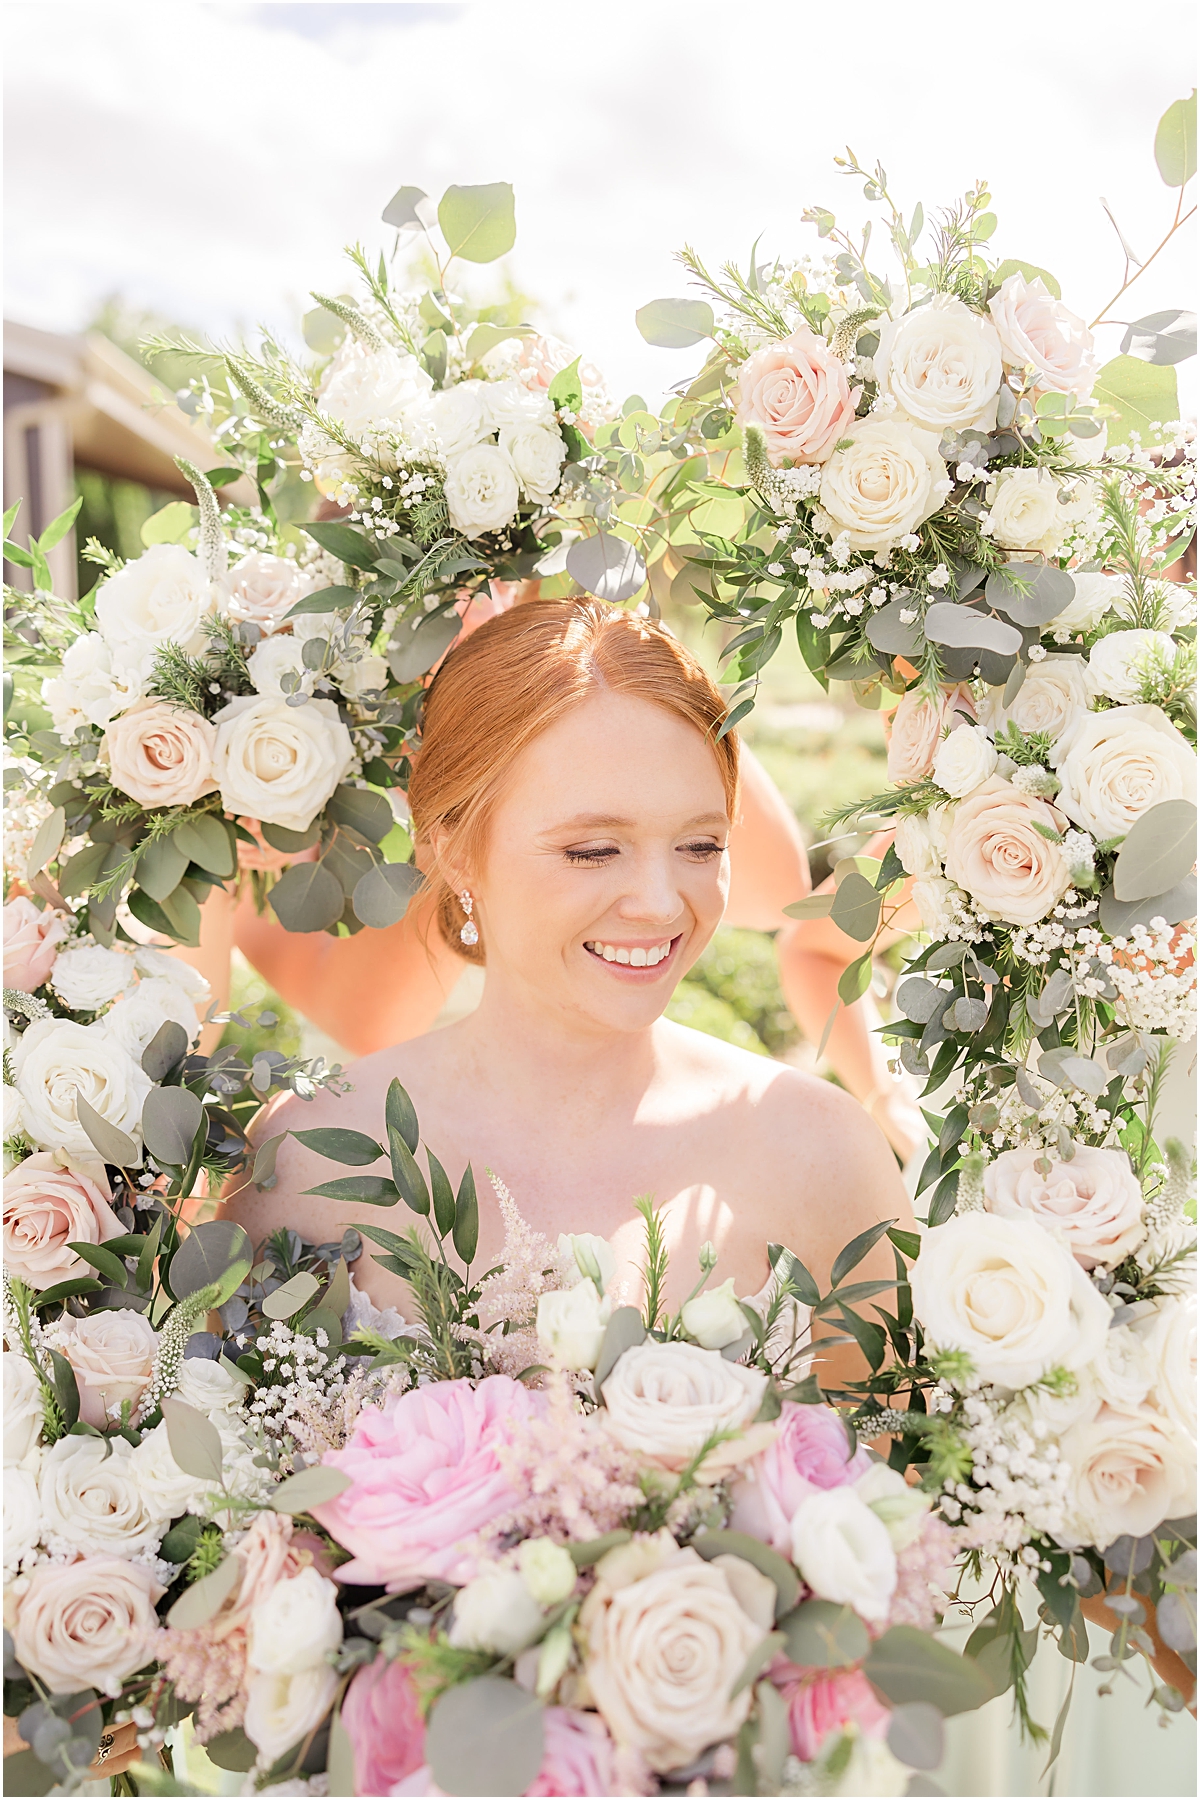 Bride surrounded by flowers 